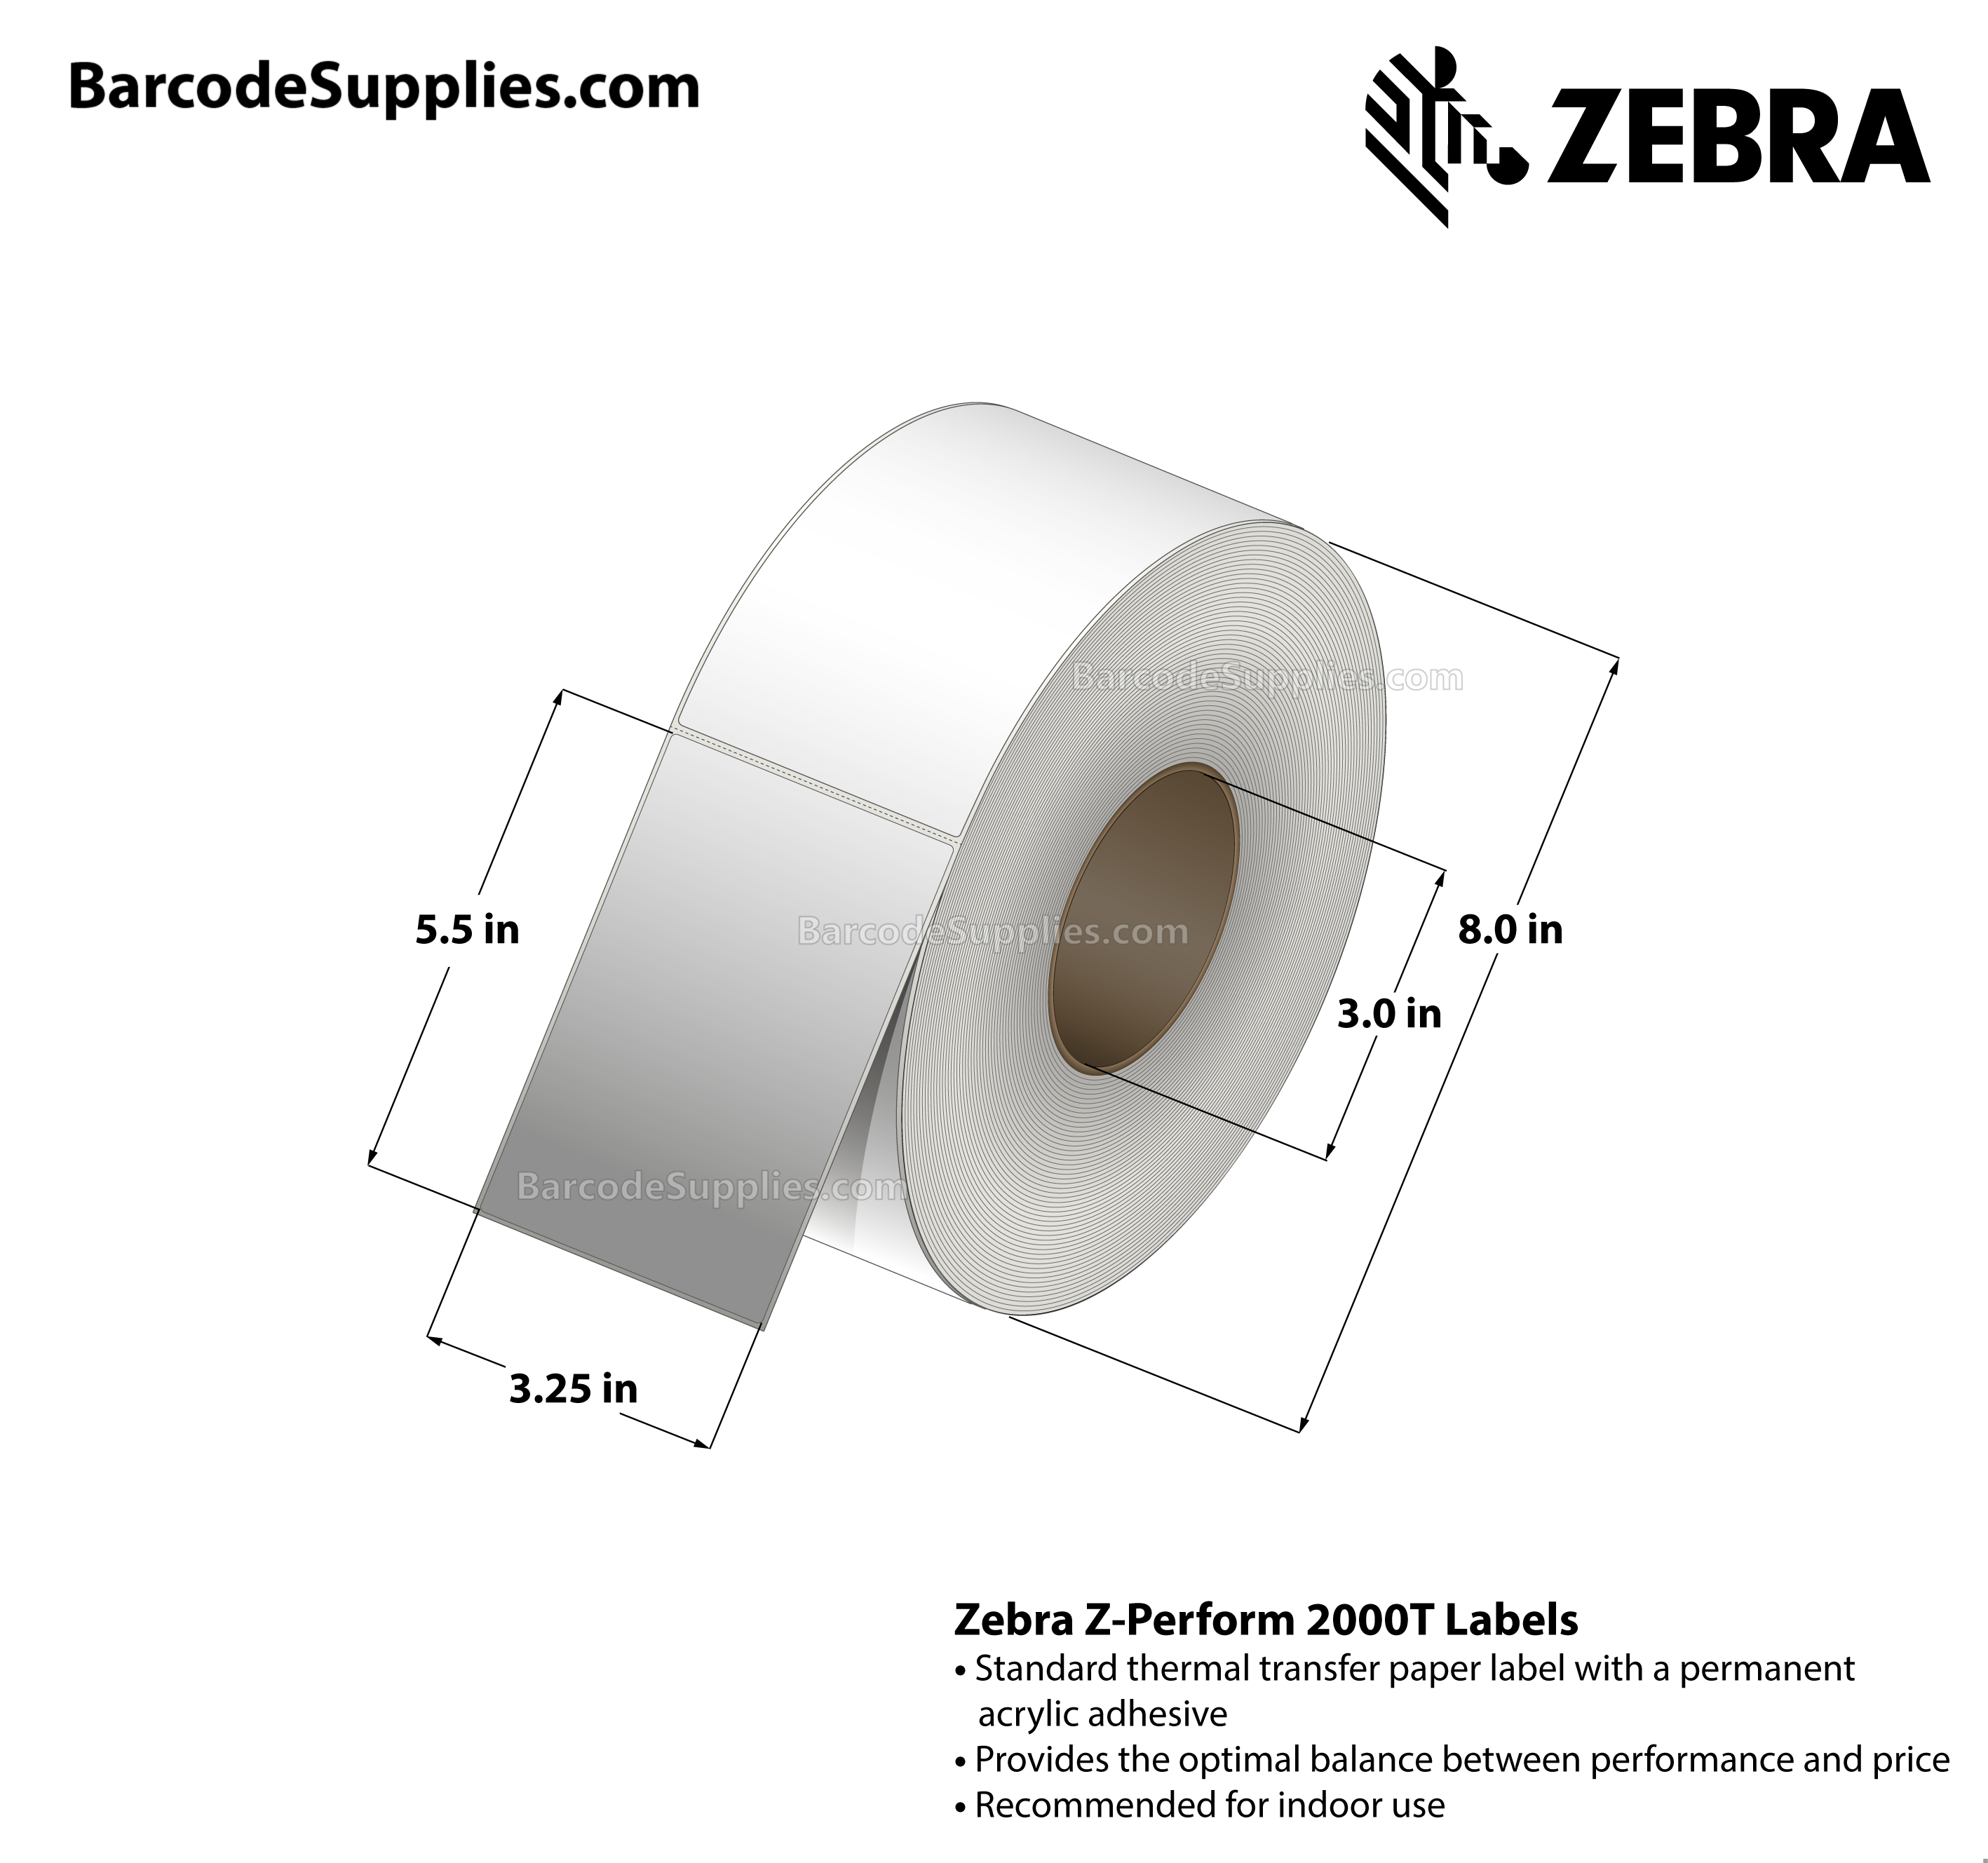 3.25 x 5.5 Thermal Transfer White Z-Perform 2000T All-Temp Labels With All-Temp Adhesive - Not Perforated - 1040 Labels Per Roll - Carton Of 6 Rolls - 6240 Labels Total - MPN: 72371